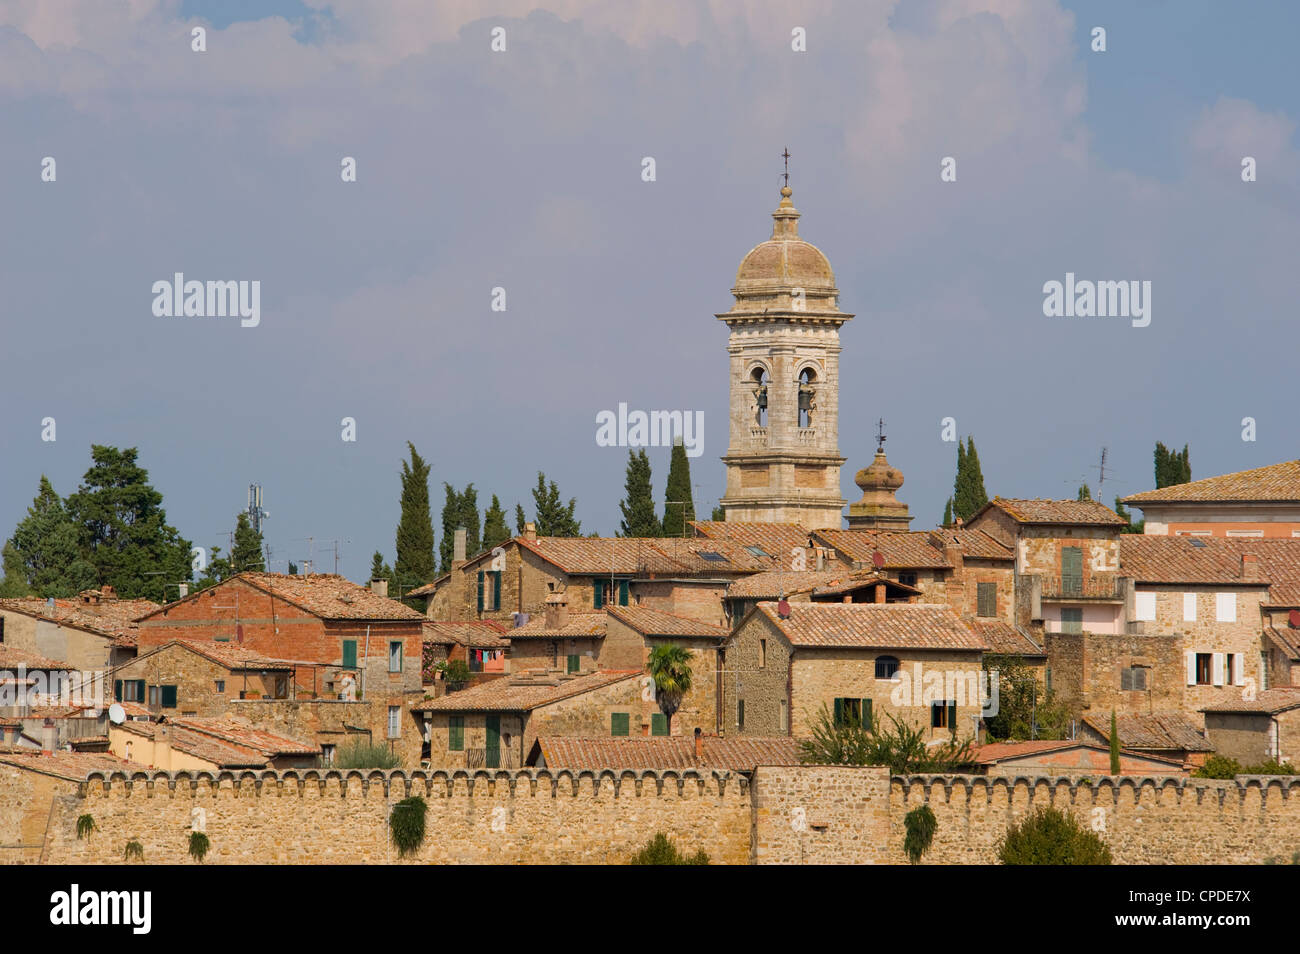 The walled town of San Quirico d'Orcia, UNESCO World Heritage Site, Tuscany, Italy, Europe Stock Photo